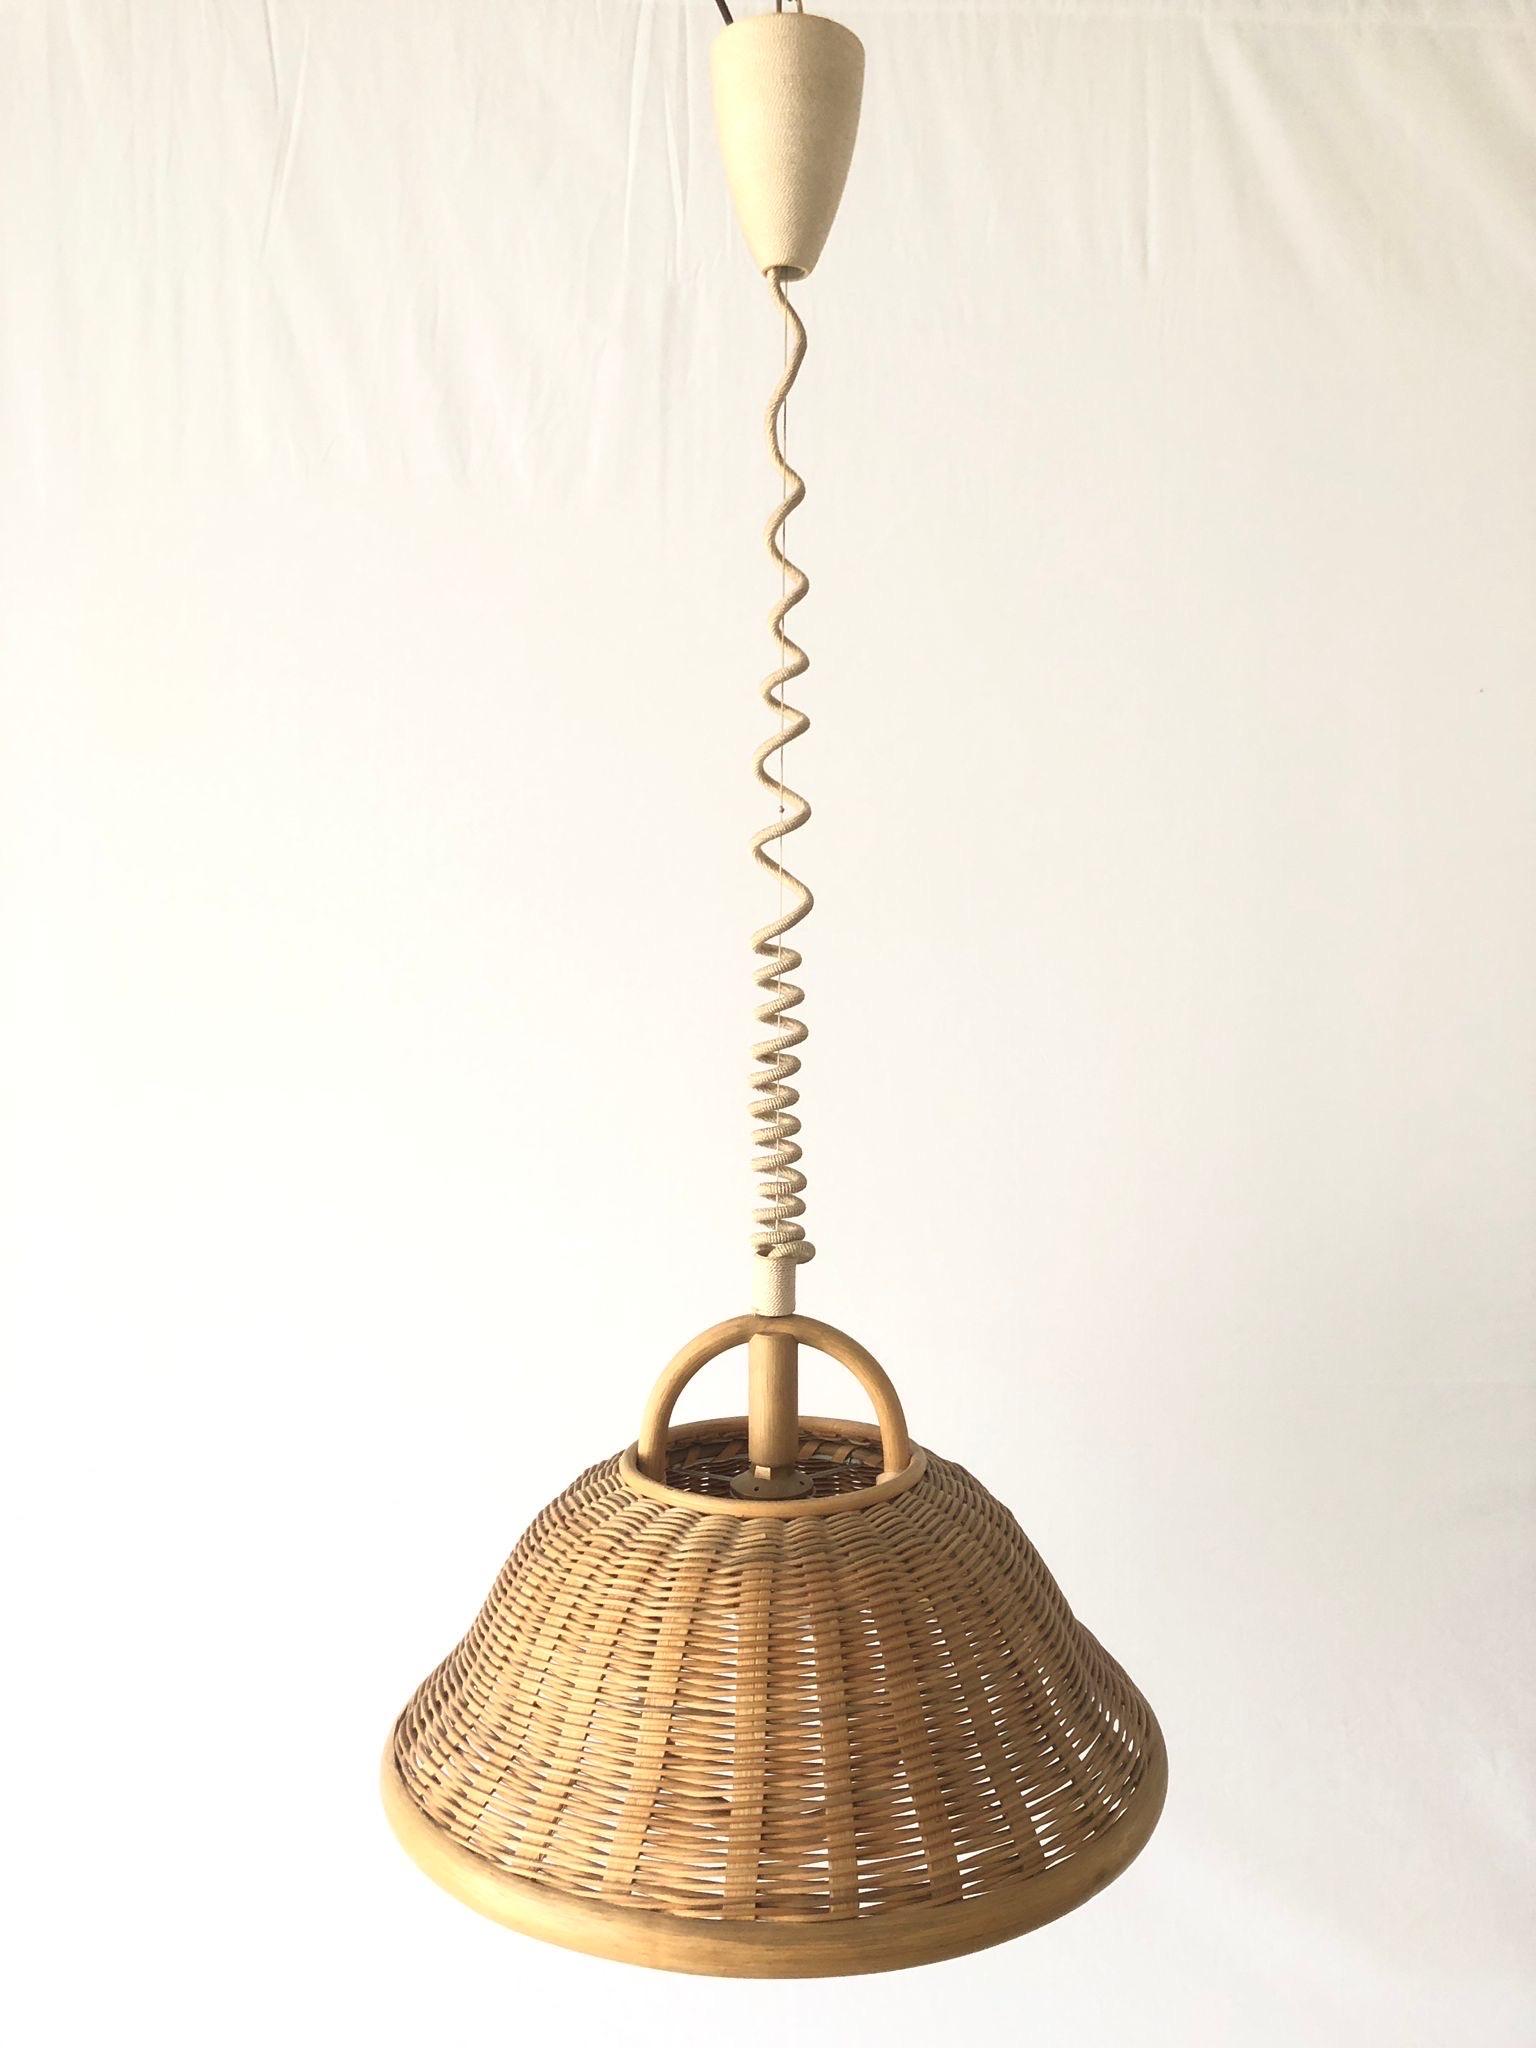 Large Wicker Adjustable Shade Pendant Lamp, 1960s, Germany For Sale 1